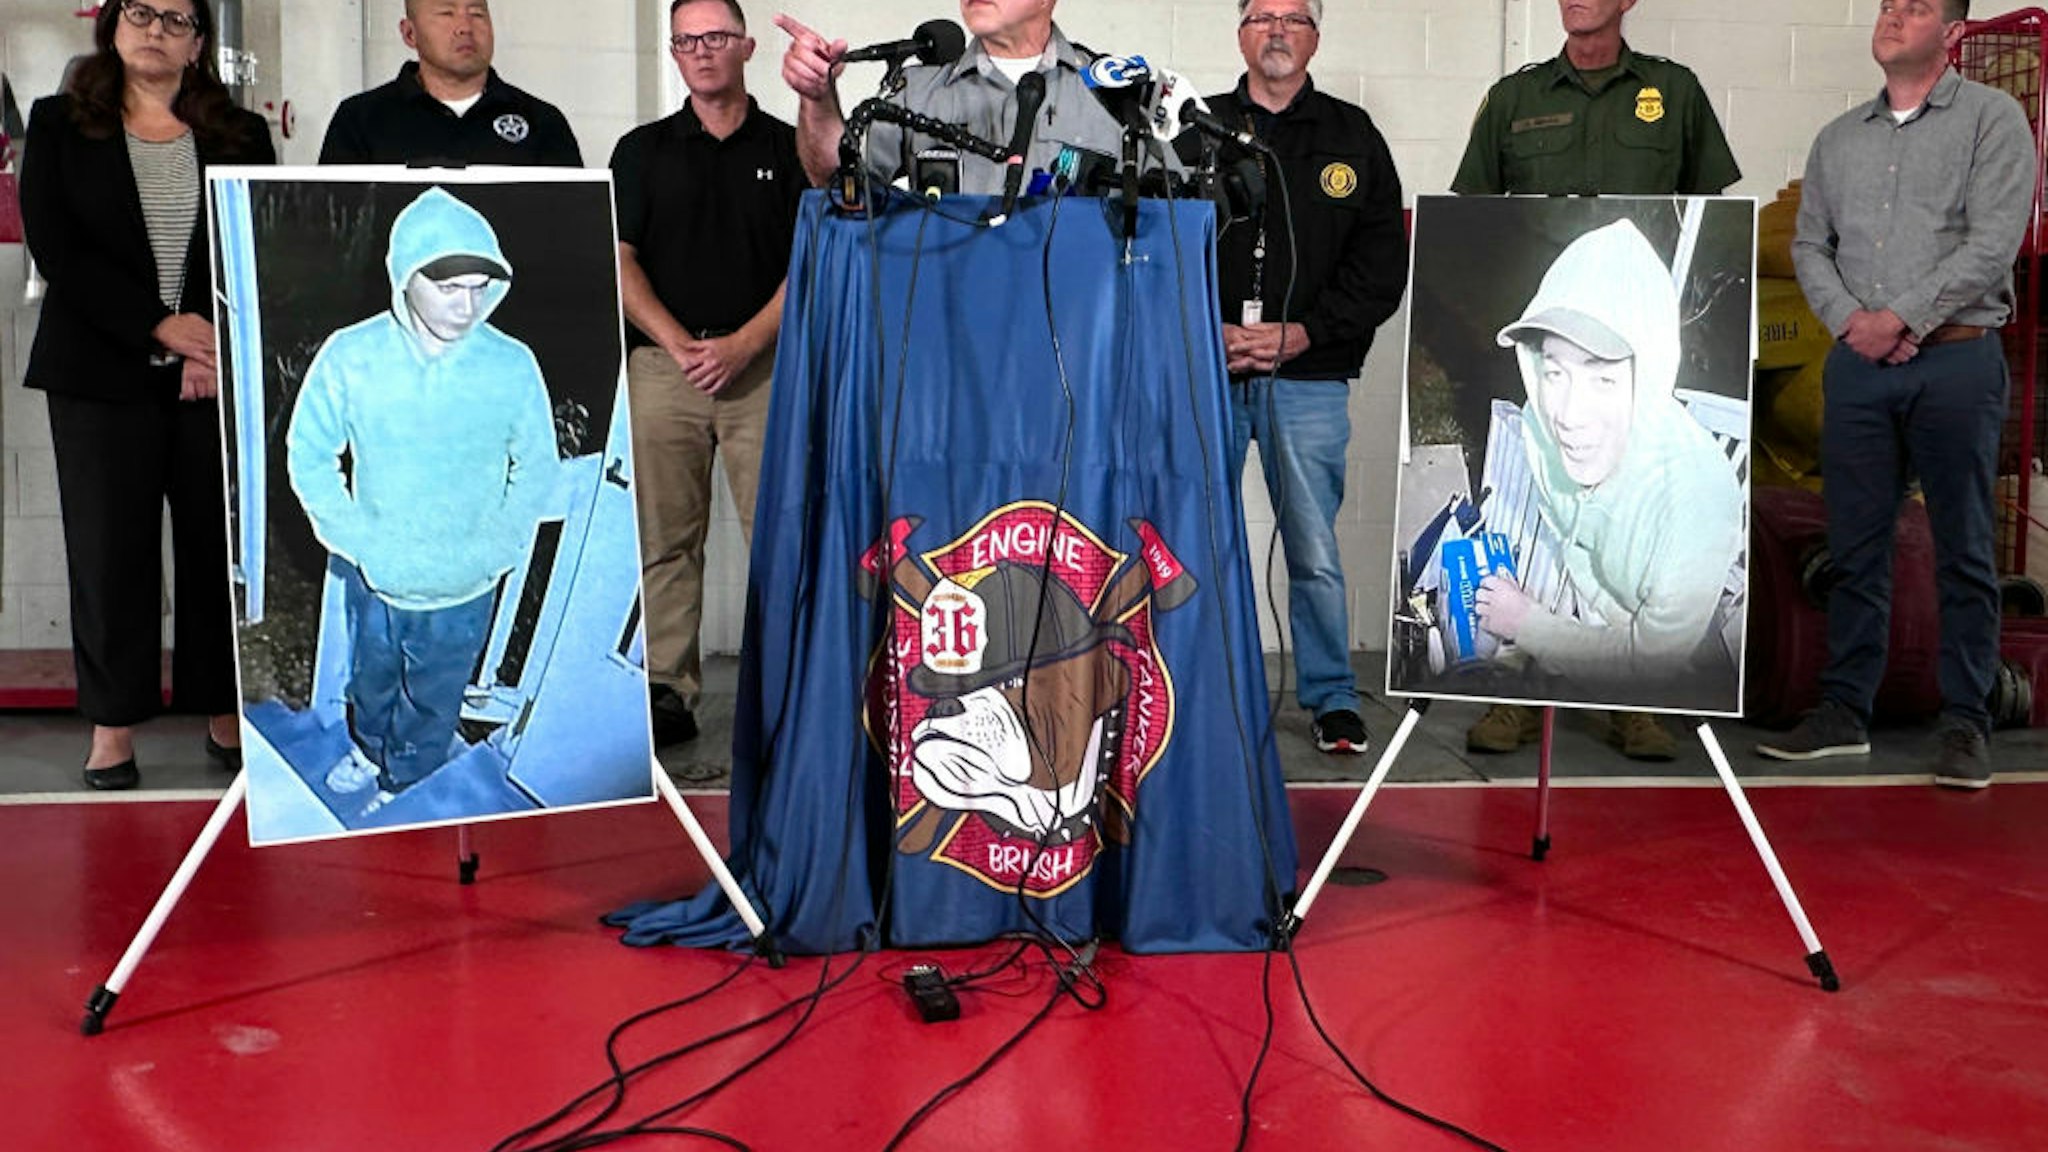 Lt. Col. George Bivens of the Pennsylvania State Police briefs the media on developments in the manhunt for convicted murderer Danelo Cavalcante at Po-Mar-Lin Fire Company on September 10, 2023 in Kennett Square, Pennsylvania.